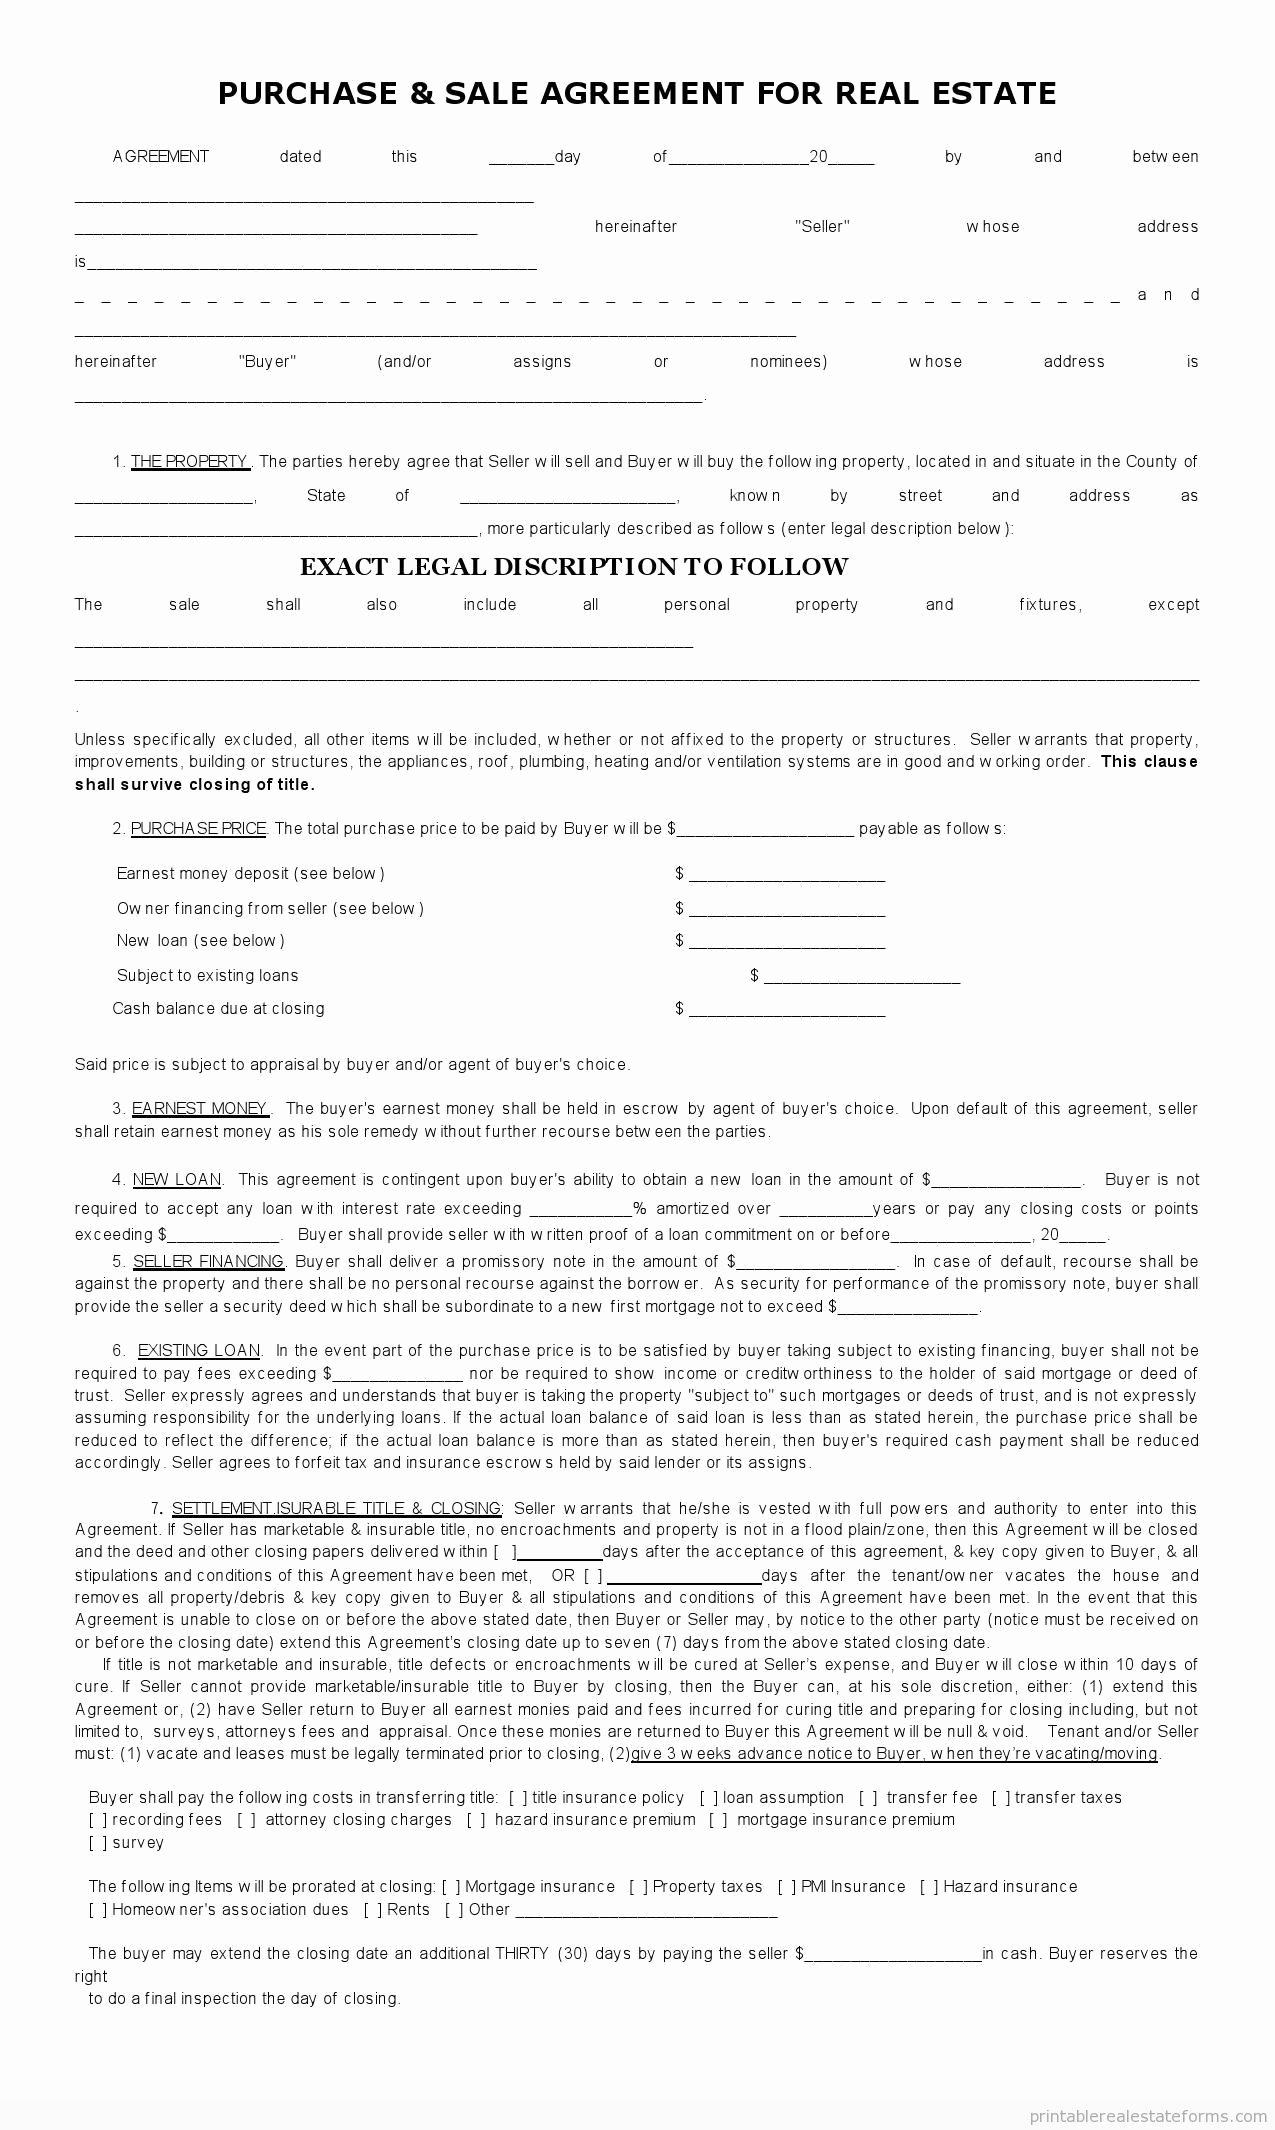 Real Estate Sales Contract Template Best Of Sample Printable Sales Contract for Ing Subject 2 form